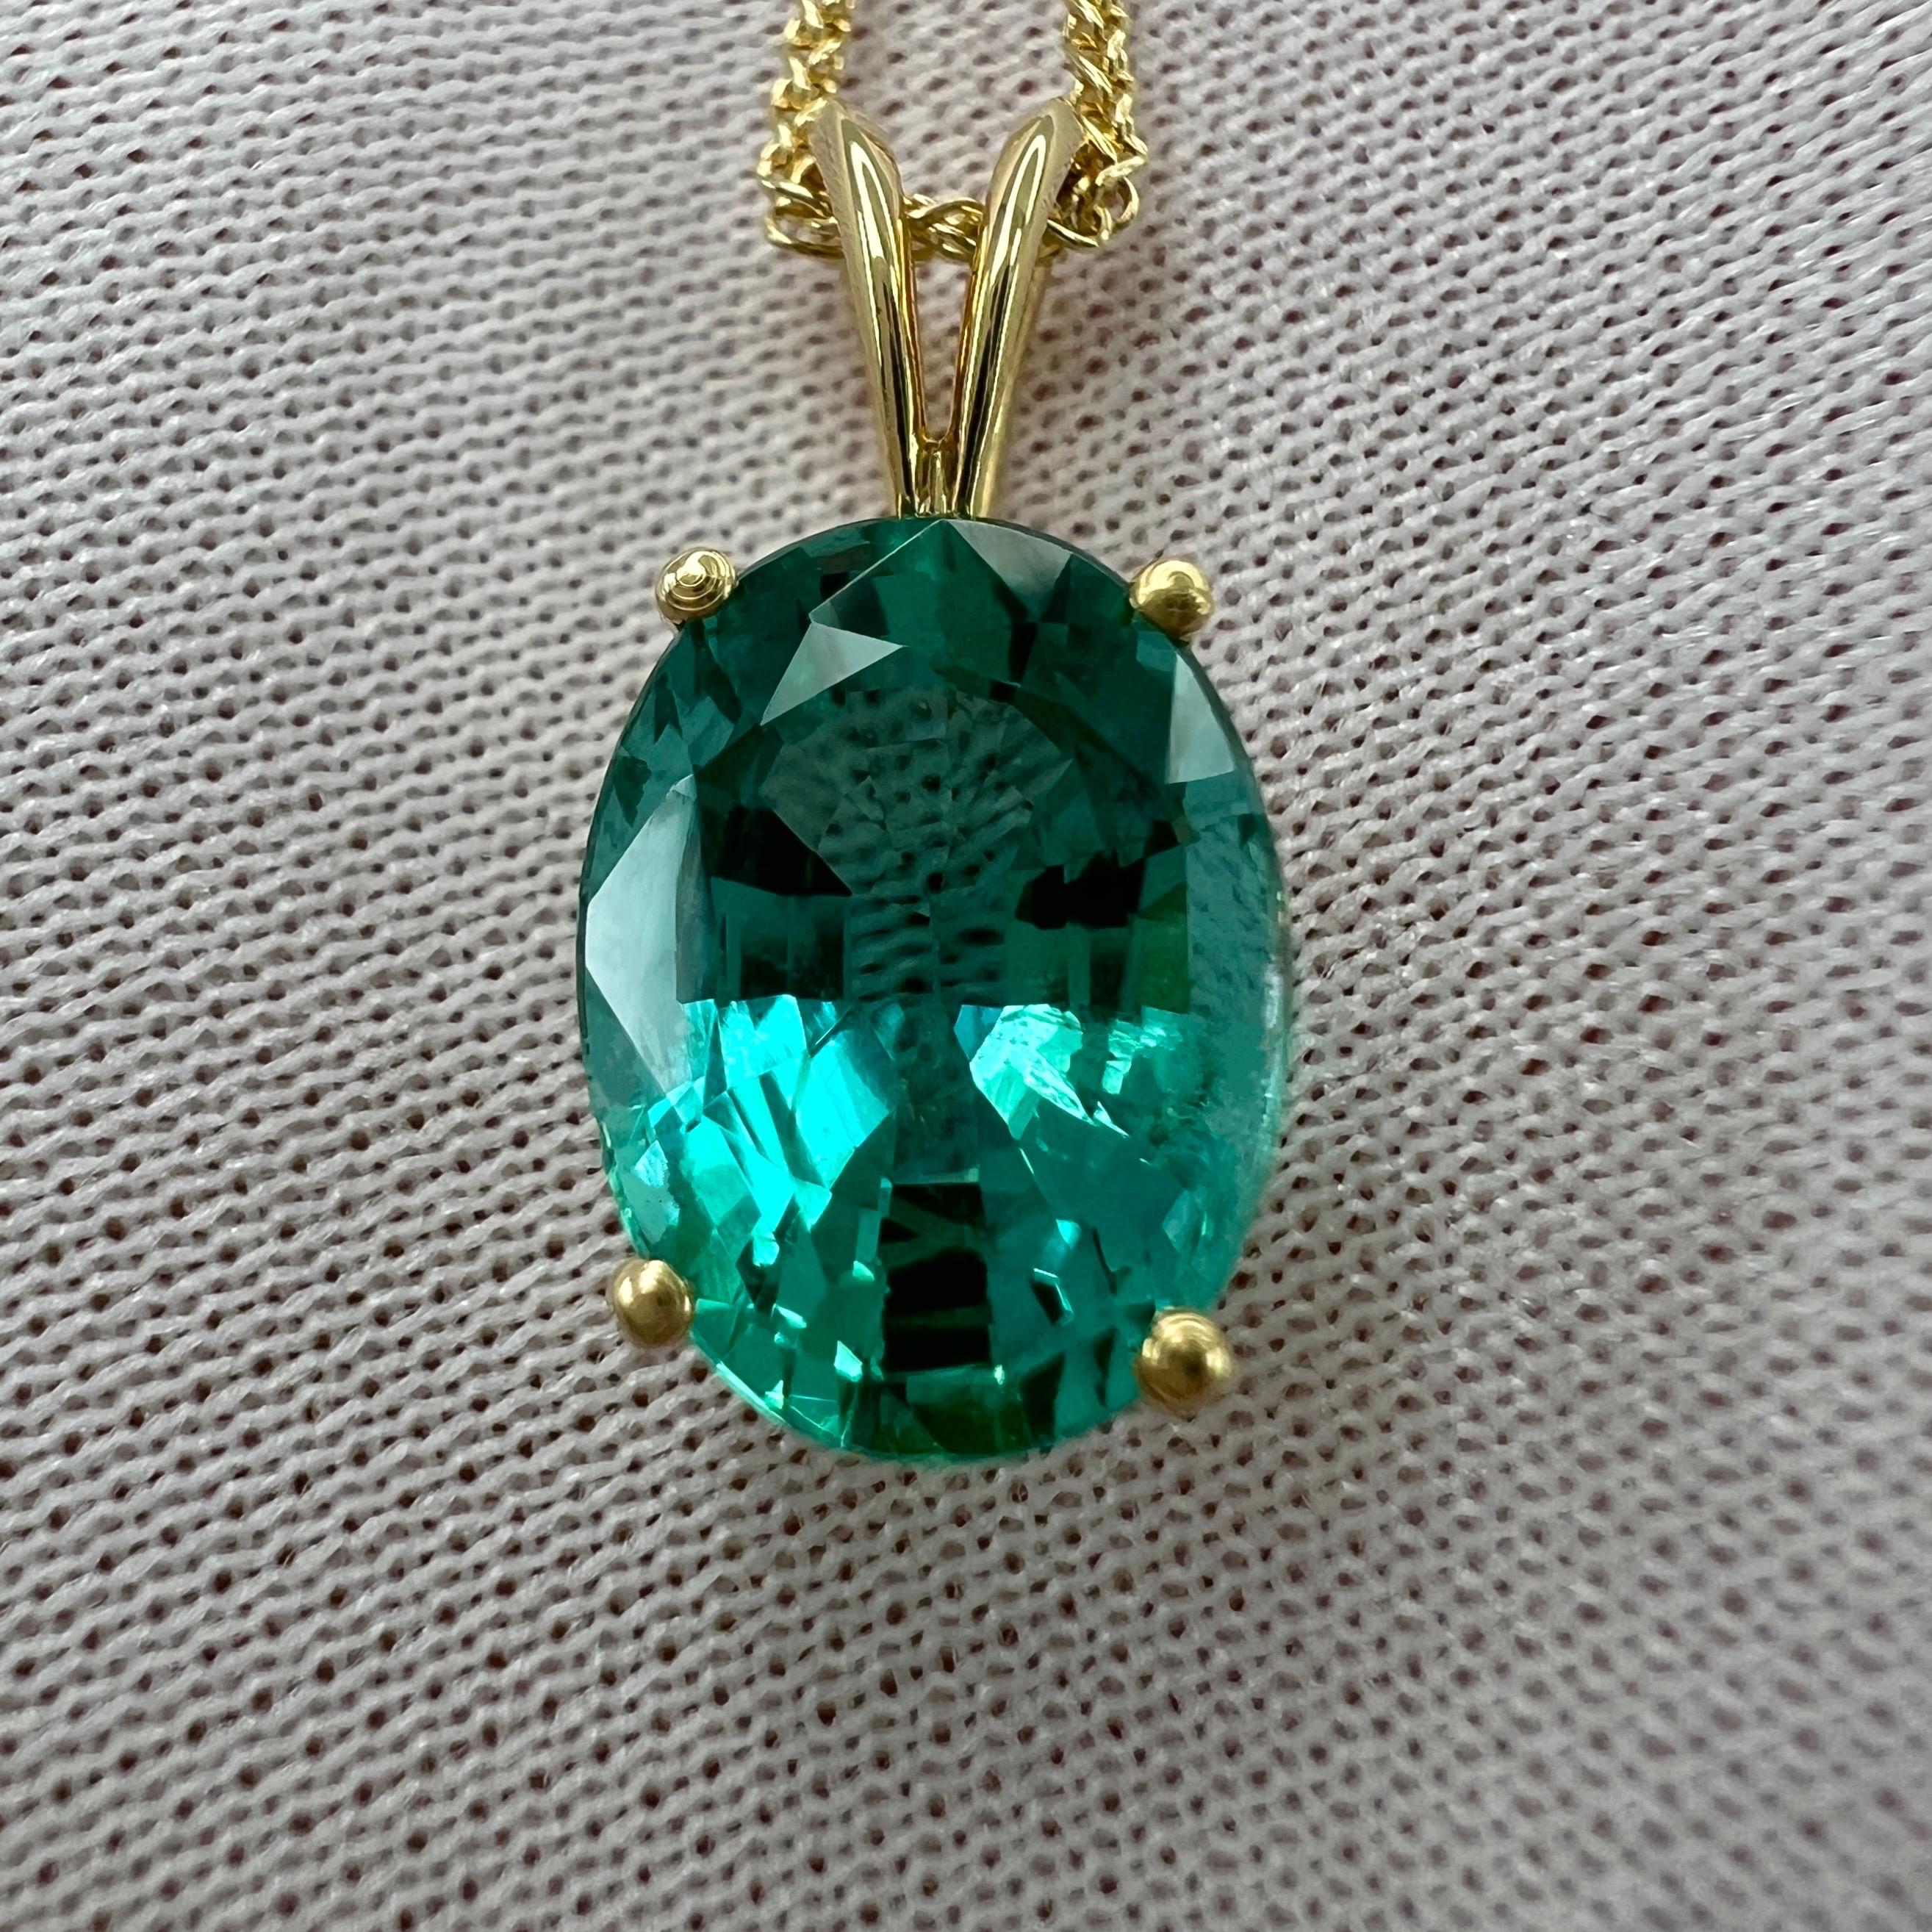 GIA Certified 2.95ct Vivid Blue Green Oval Cut Emerald 18k Gold Pendant Necklace For Sale 5